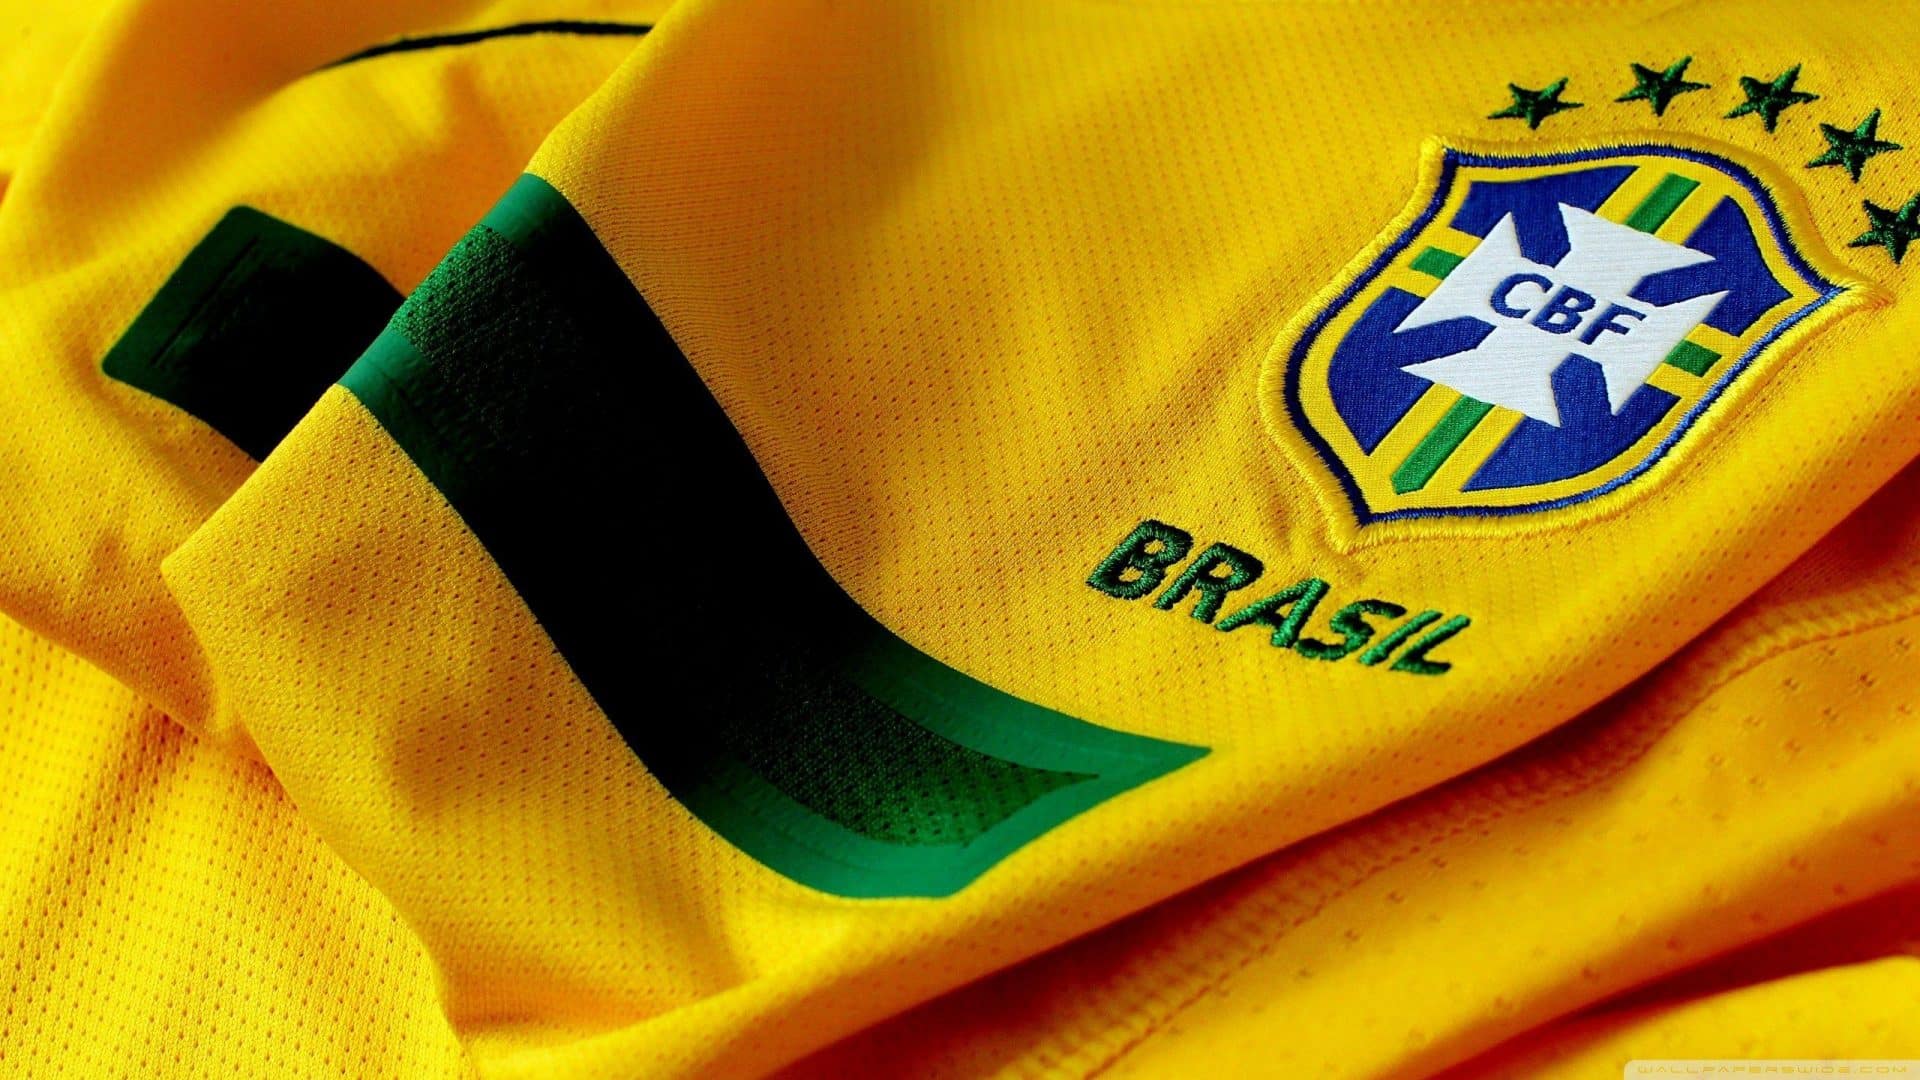 Brazil continues to lead FIFA's world ranking.